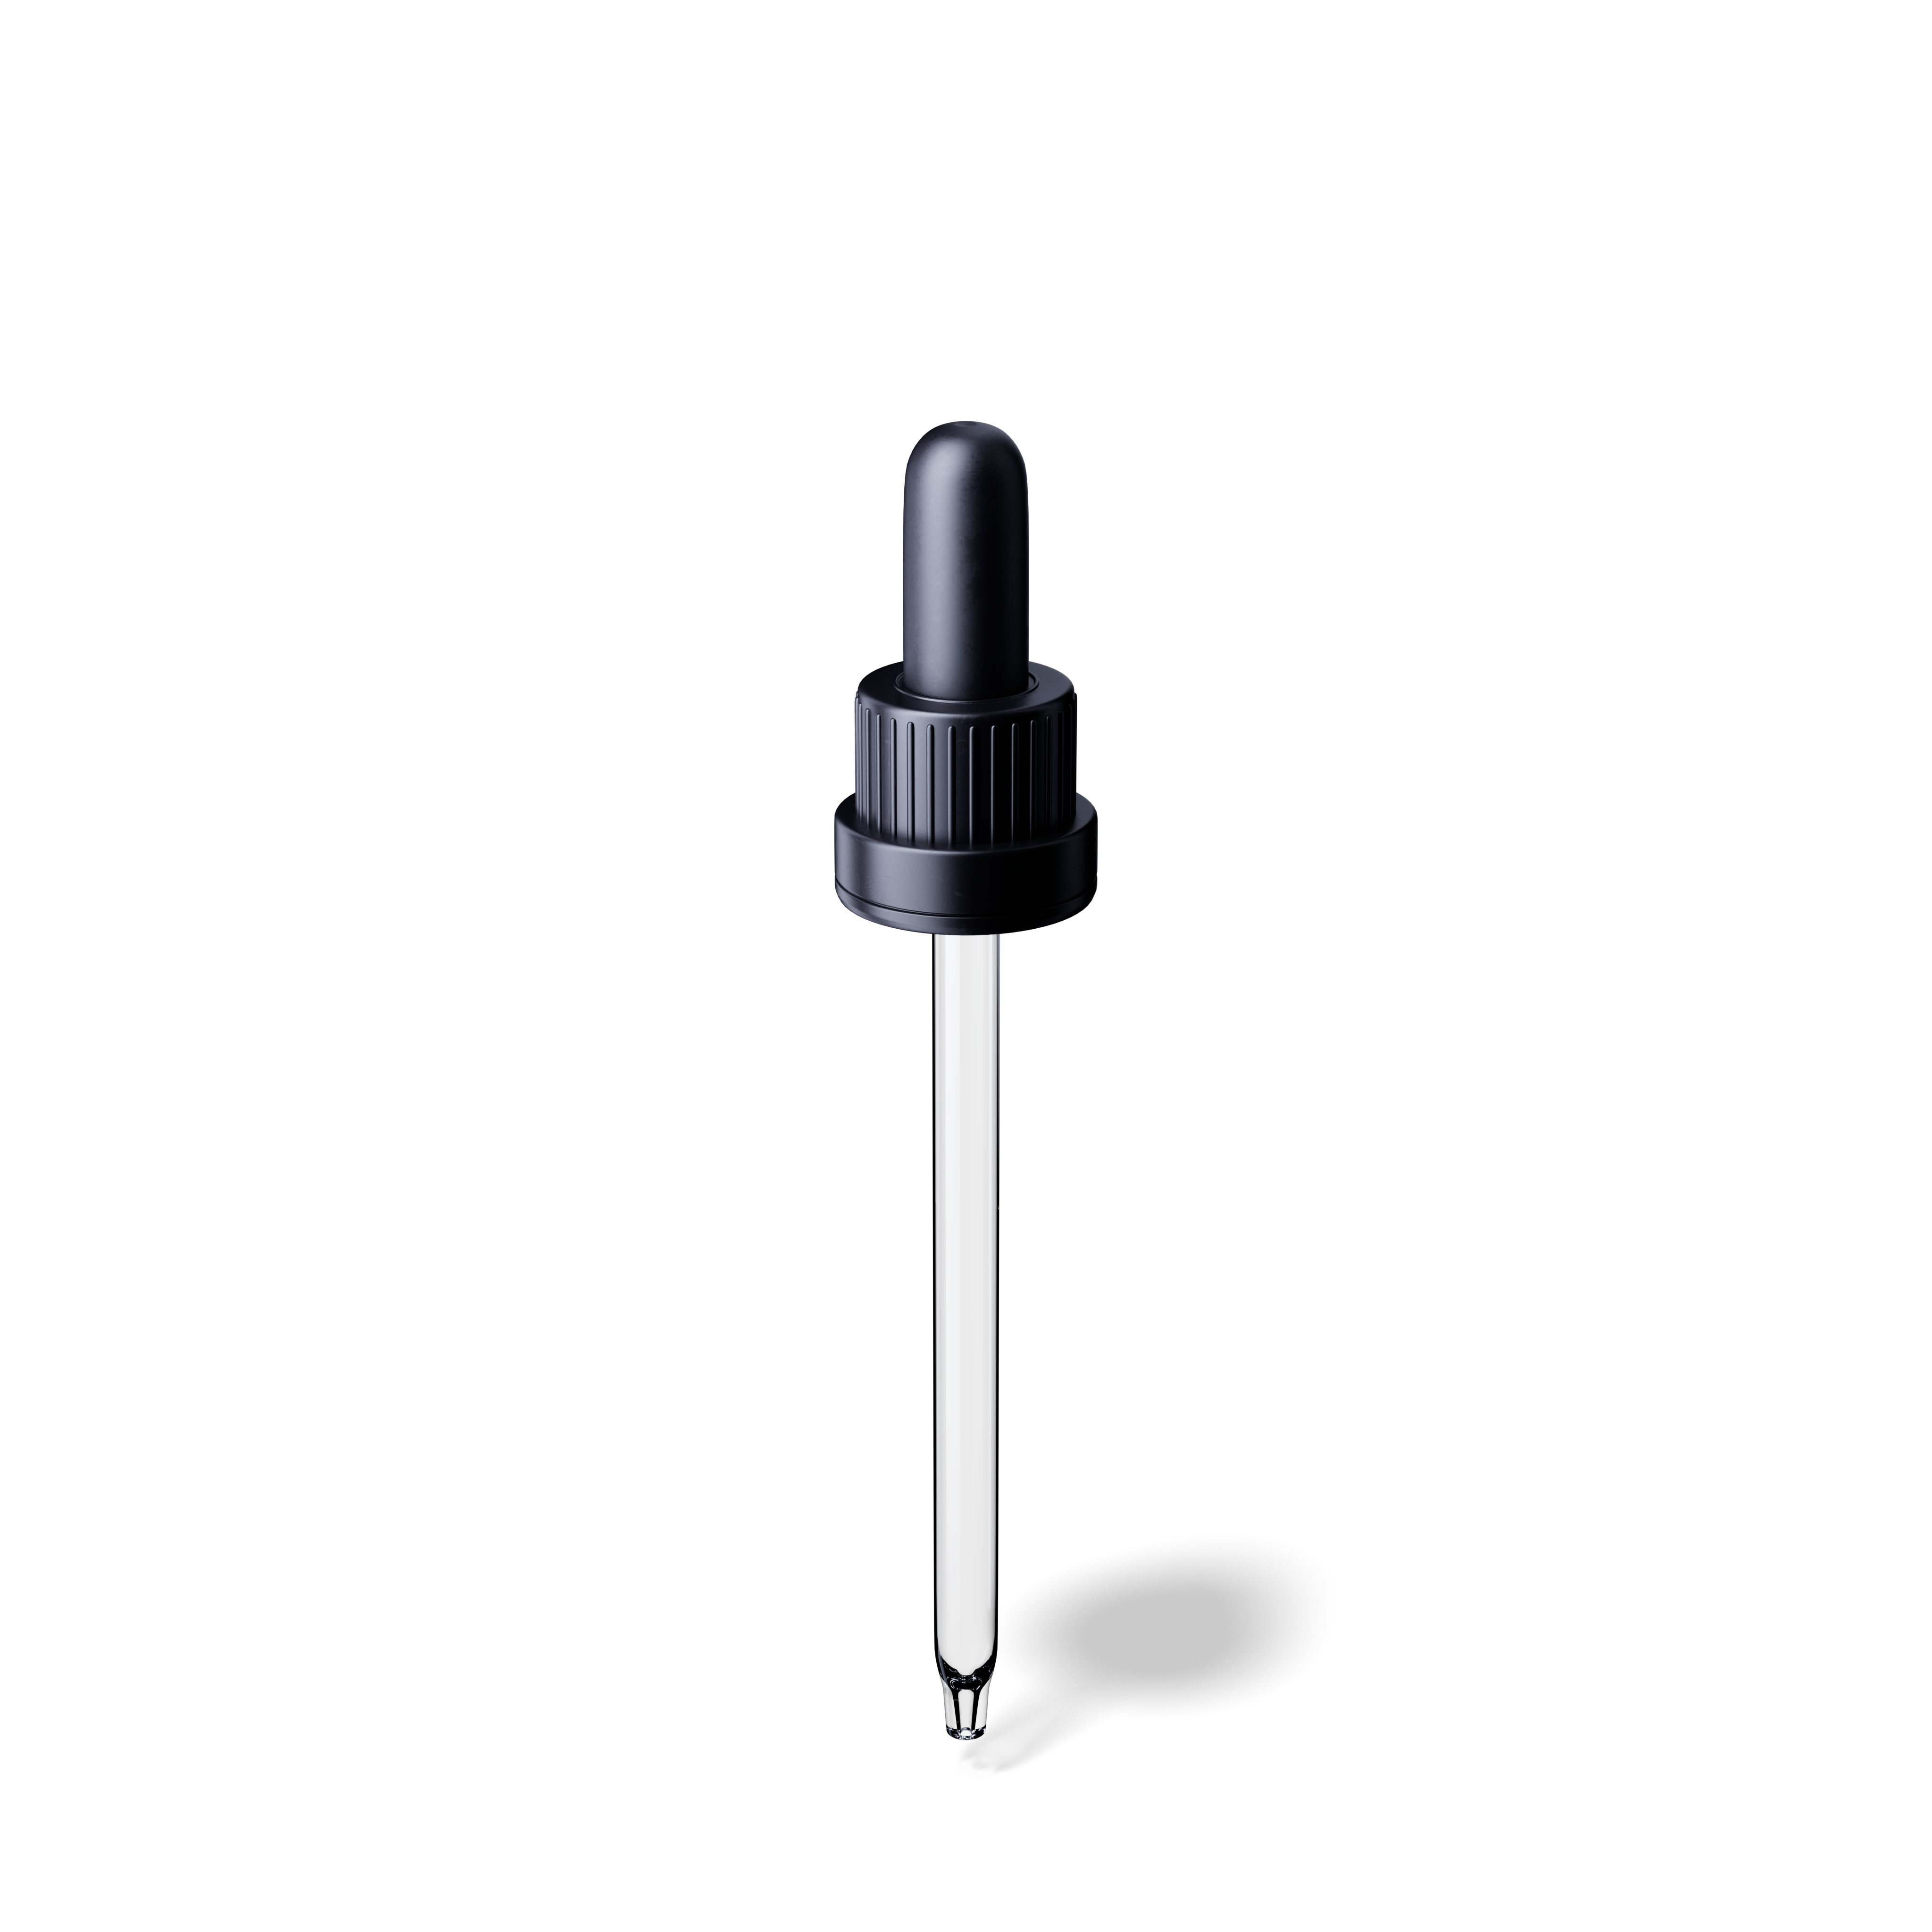 Pipette tamper evident DIN18, III, black, ribbed, bulb TPE, dose 1.0ml, conical tip (Orion 50)